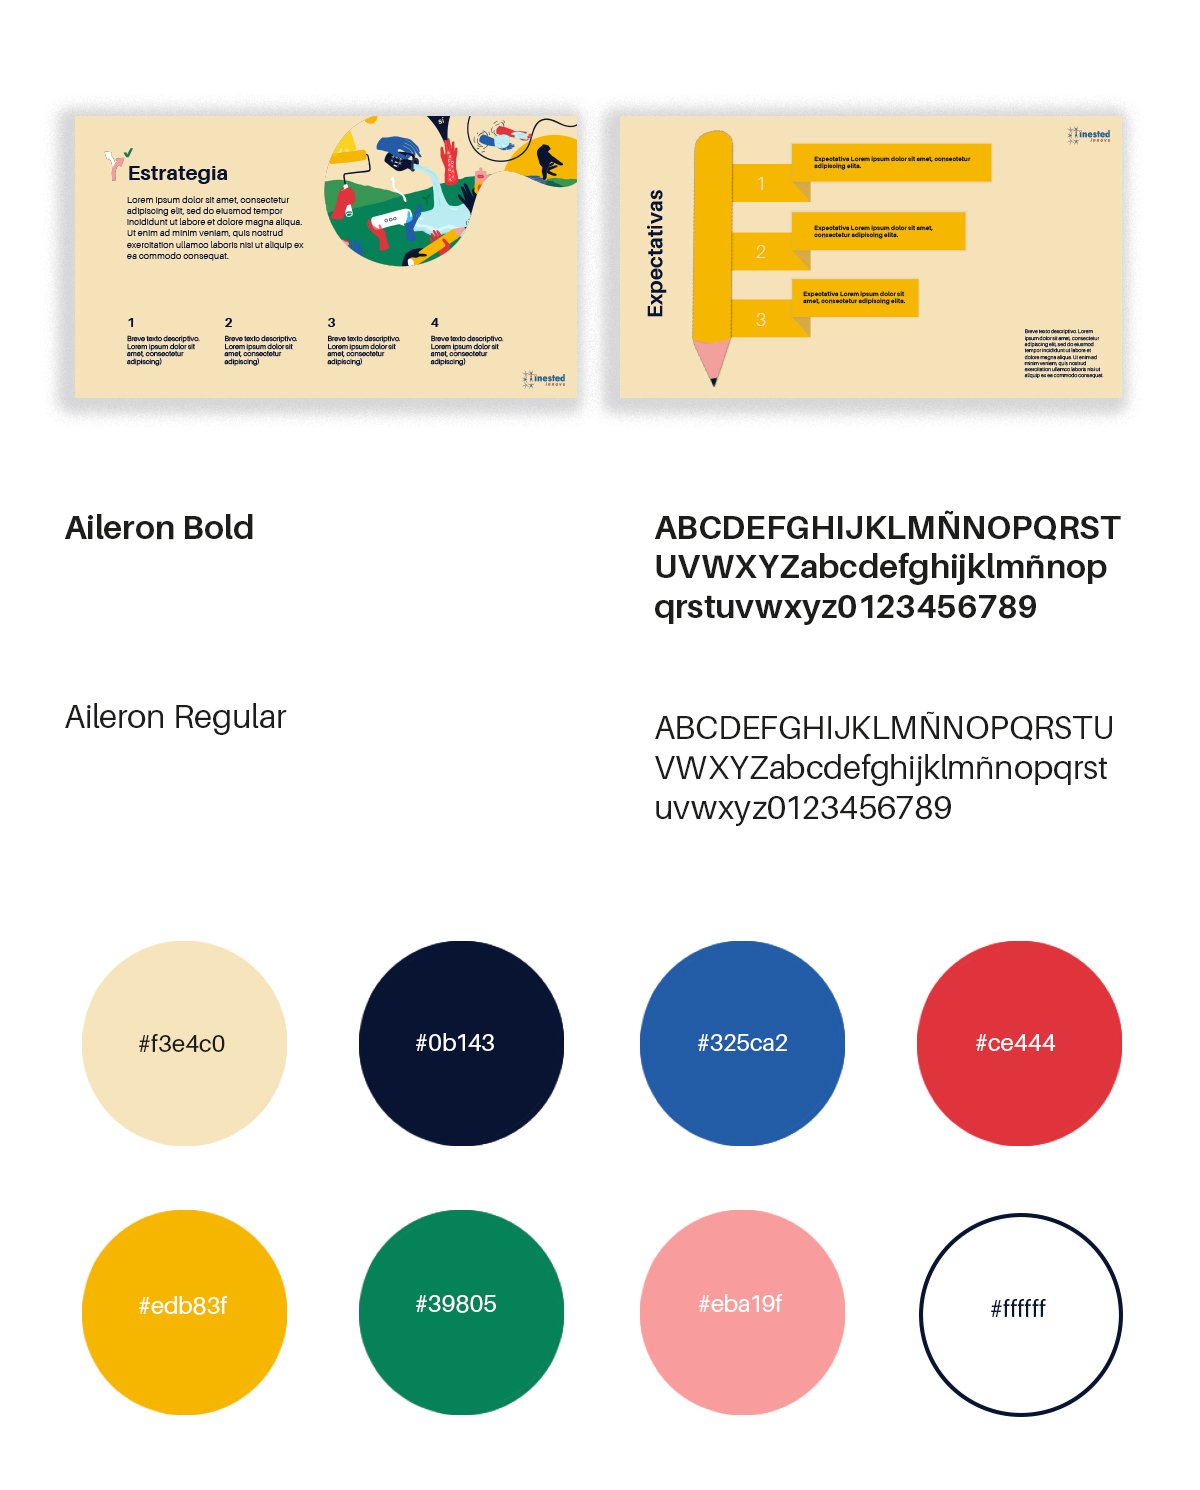 fonts-and-colors_Inested-Innova.jpg